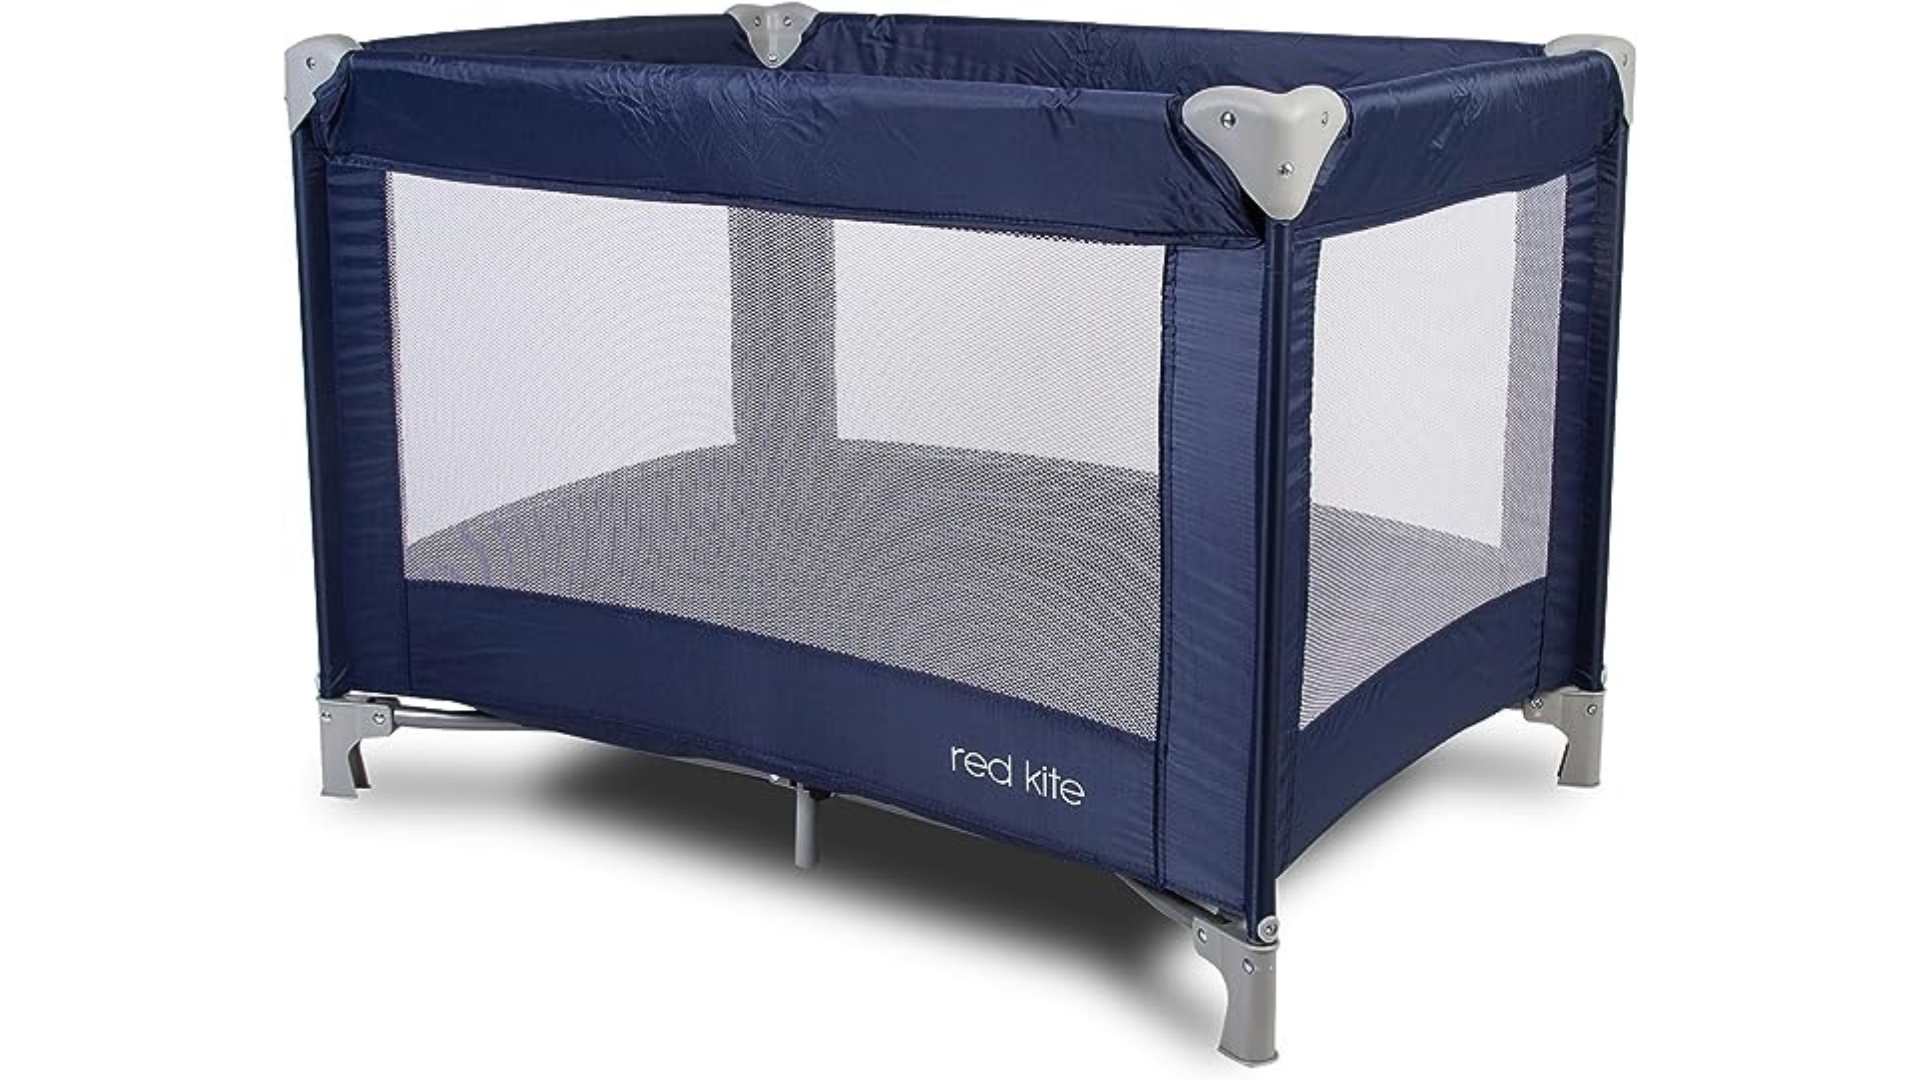 The Red Kite Sleep Tight Travel Cot